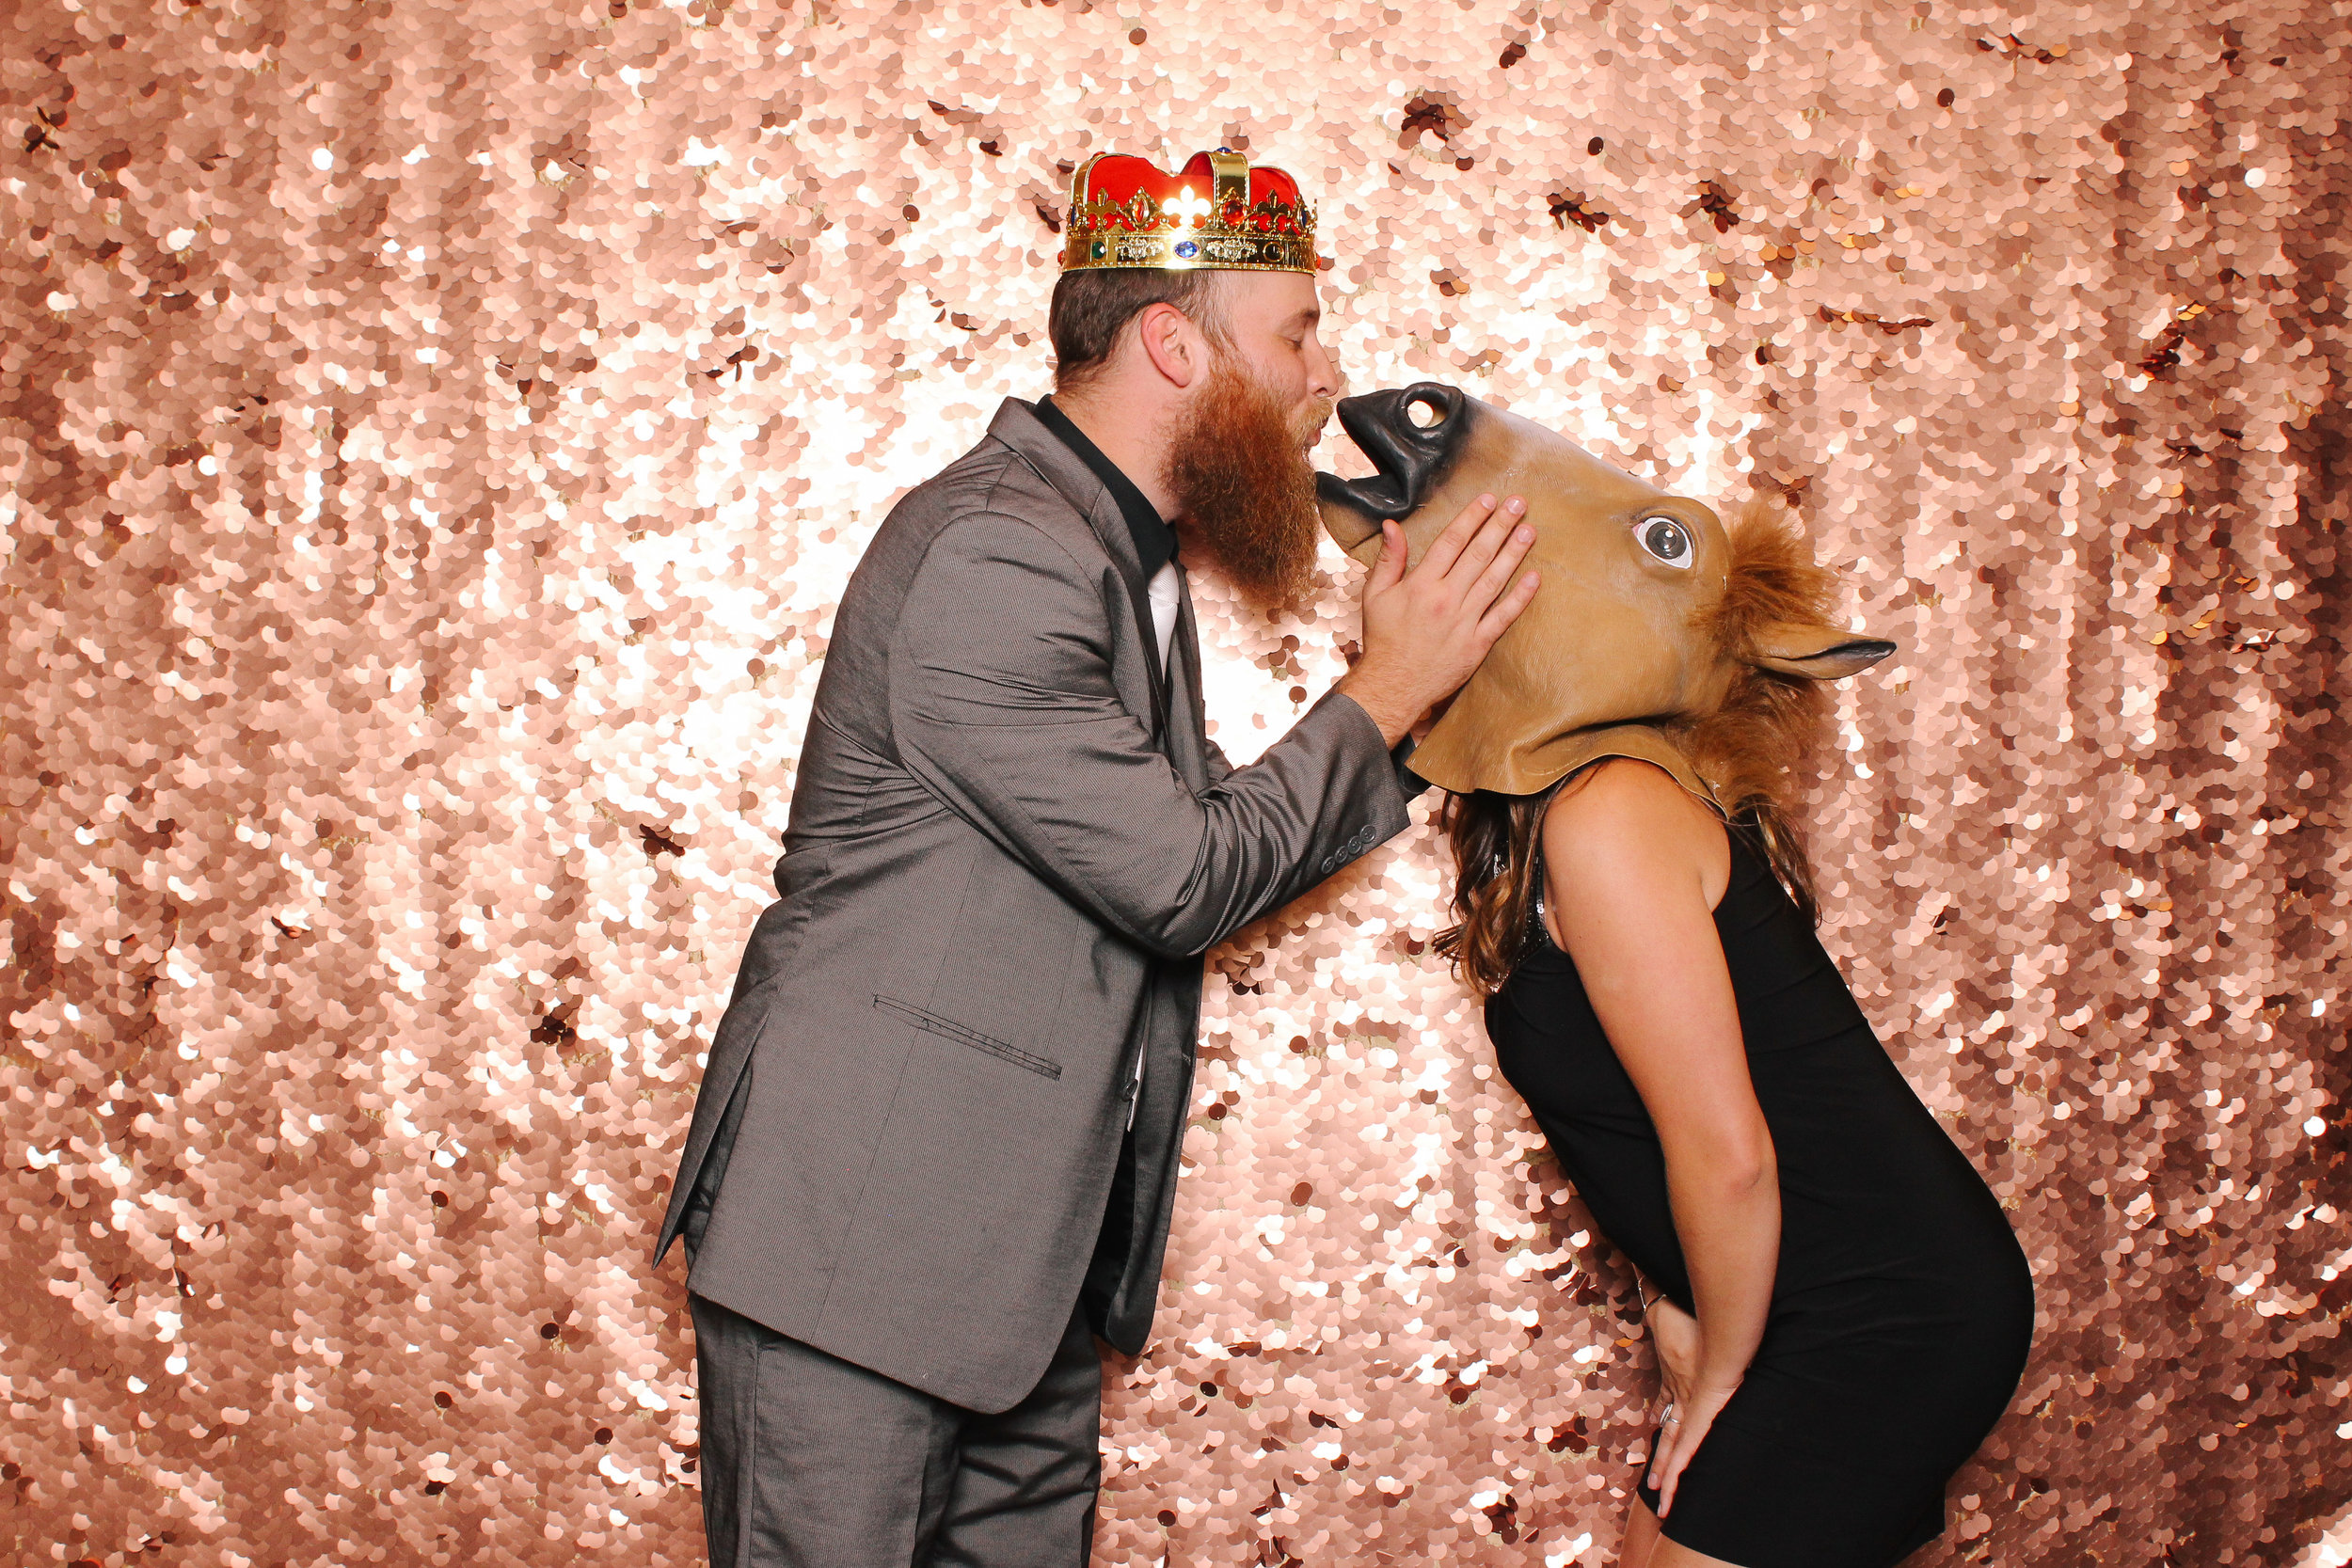 00230-metropolitan at the 9 photobooth too much awesomeness Cleveland Photobooth Company-20160924.jpg